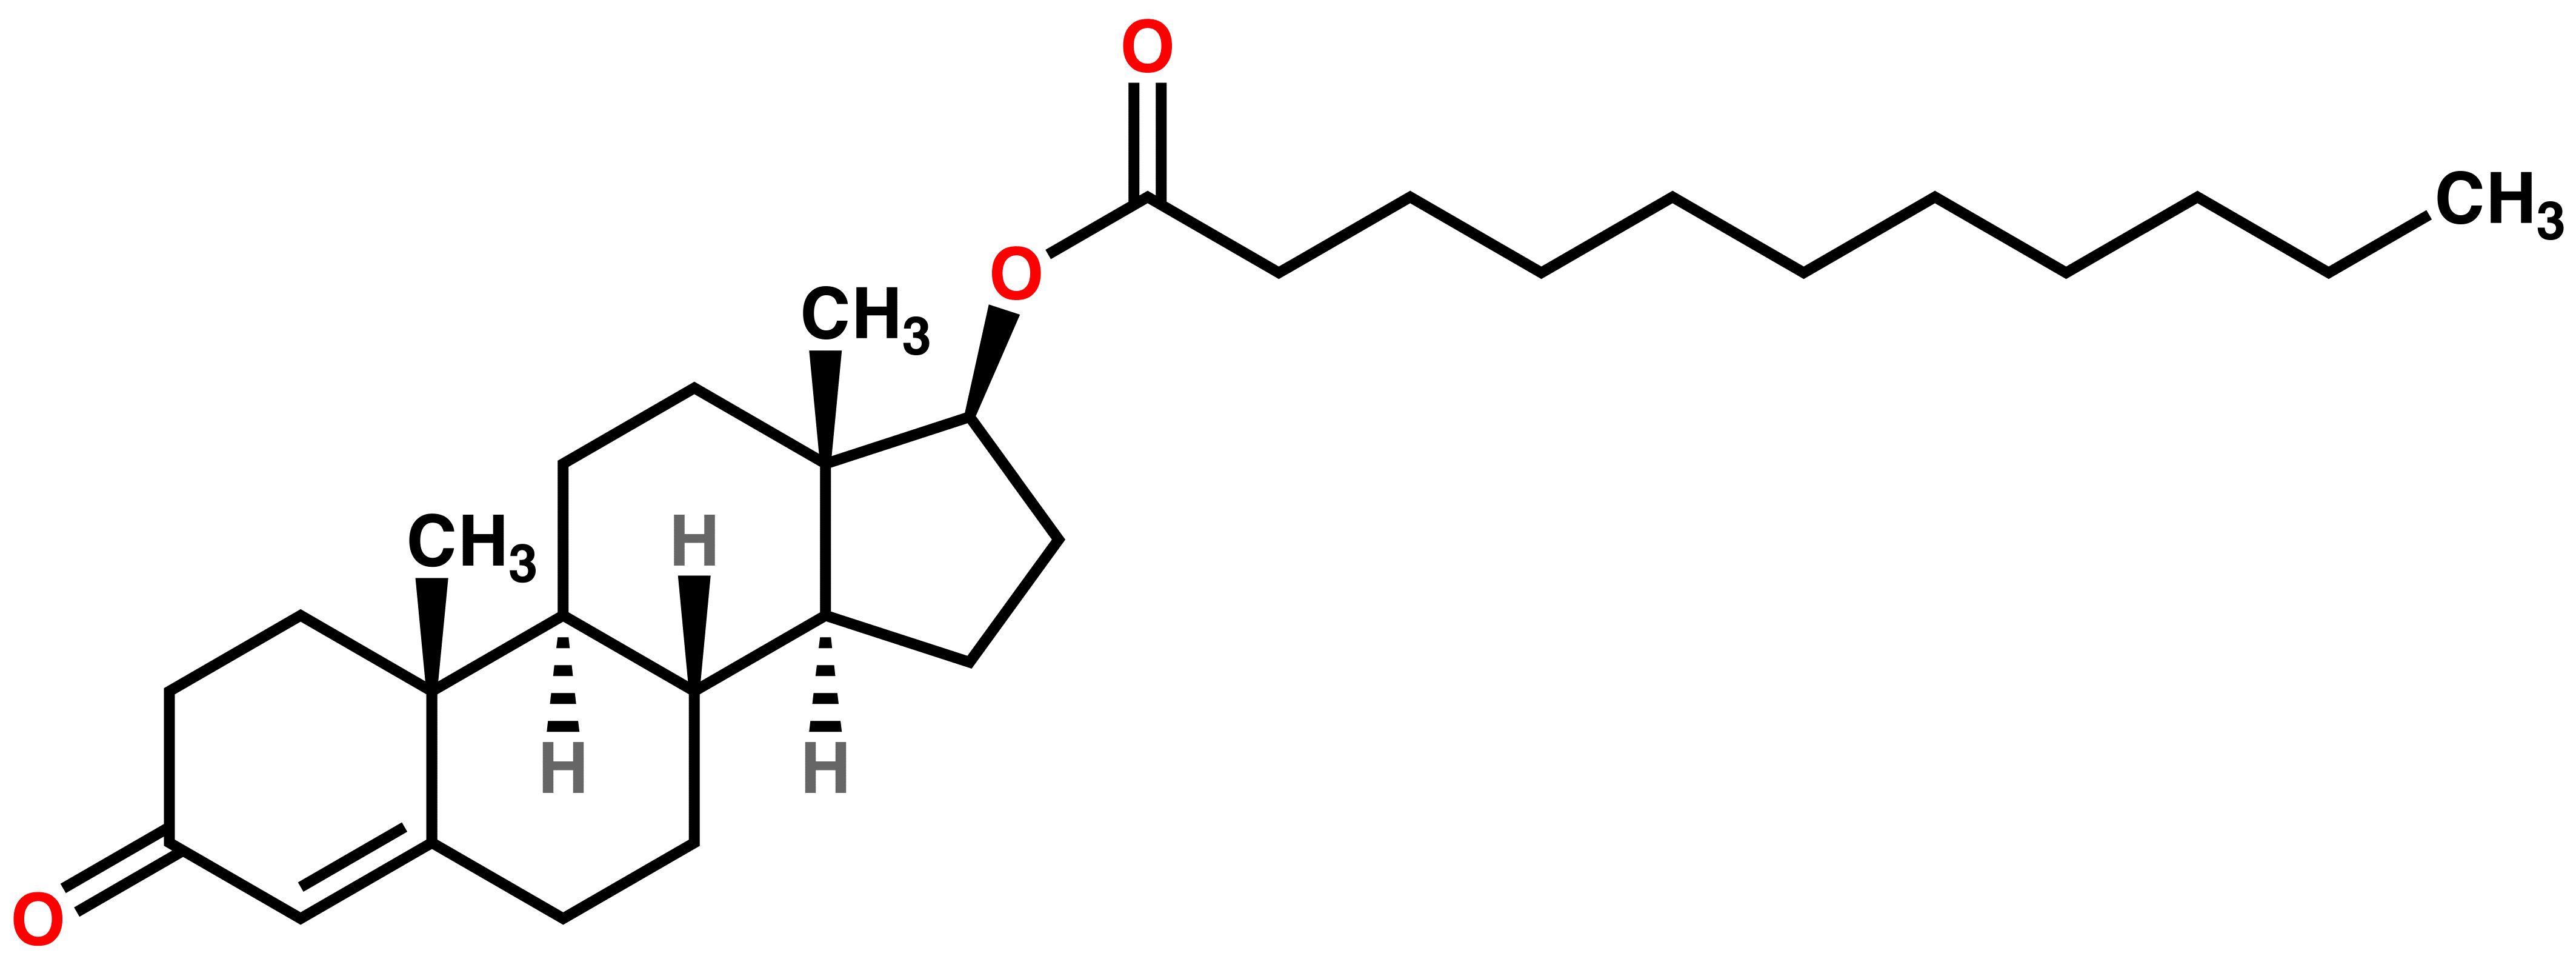 File:Testosterone undecanoate.png - Wikimedia Commons